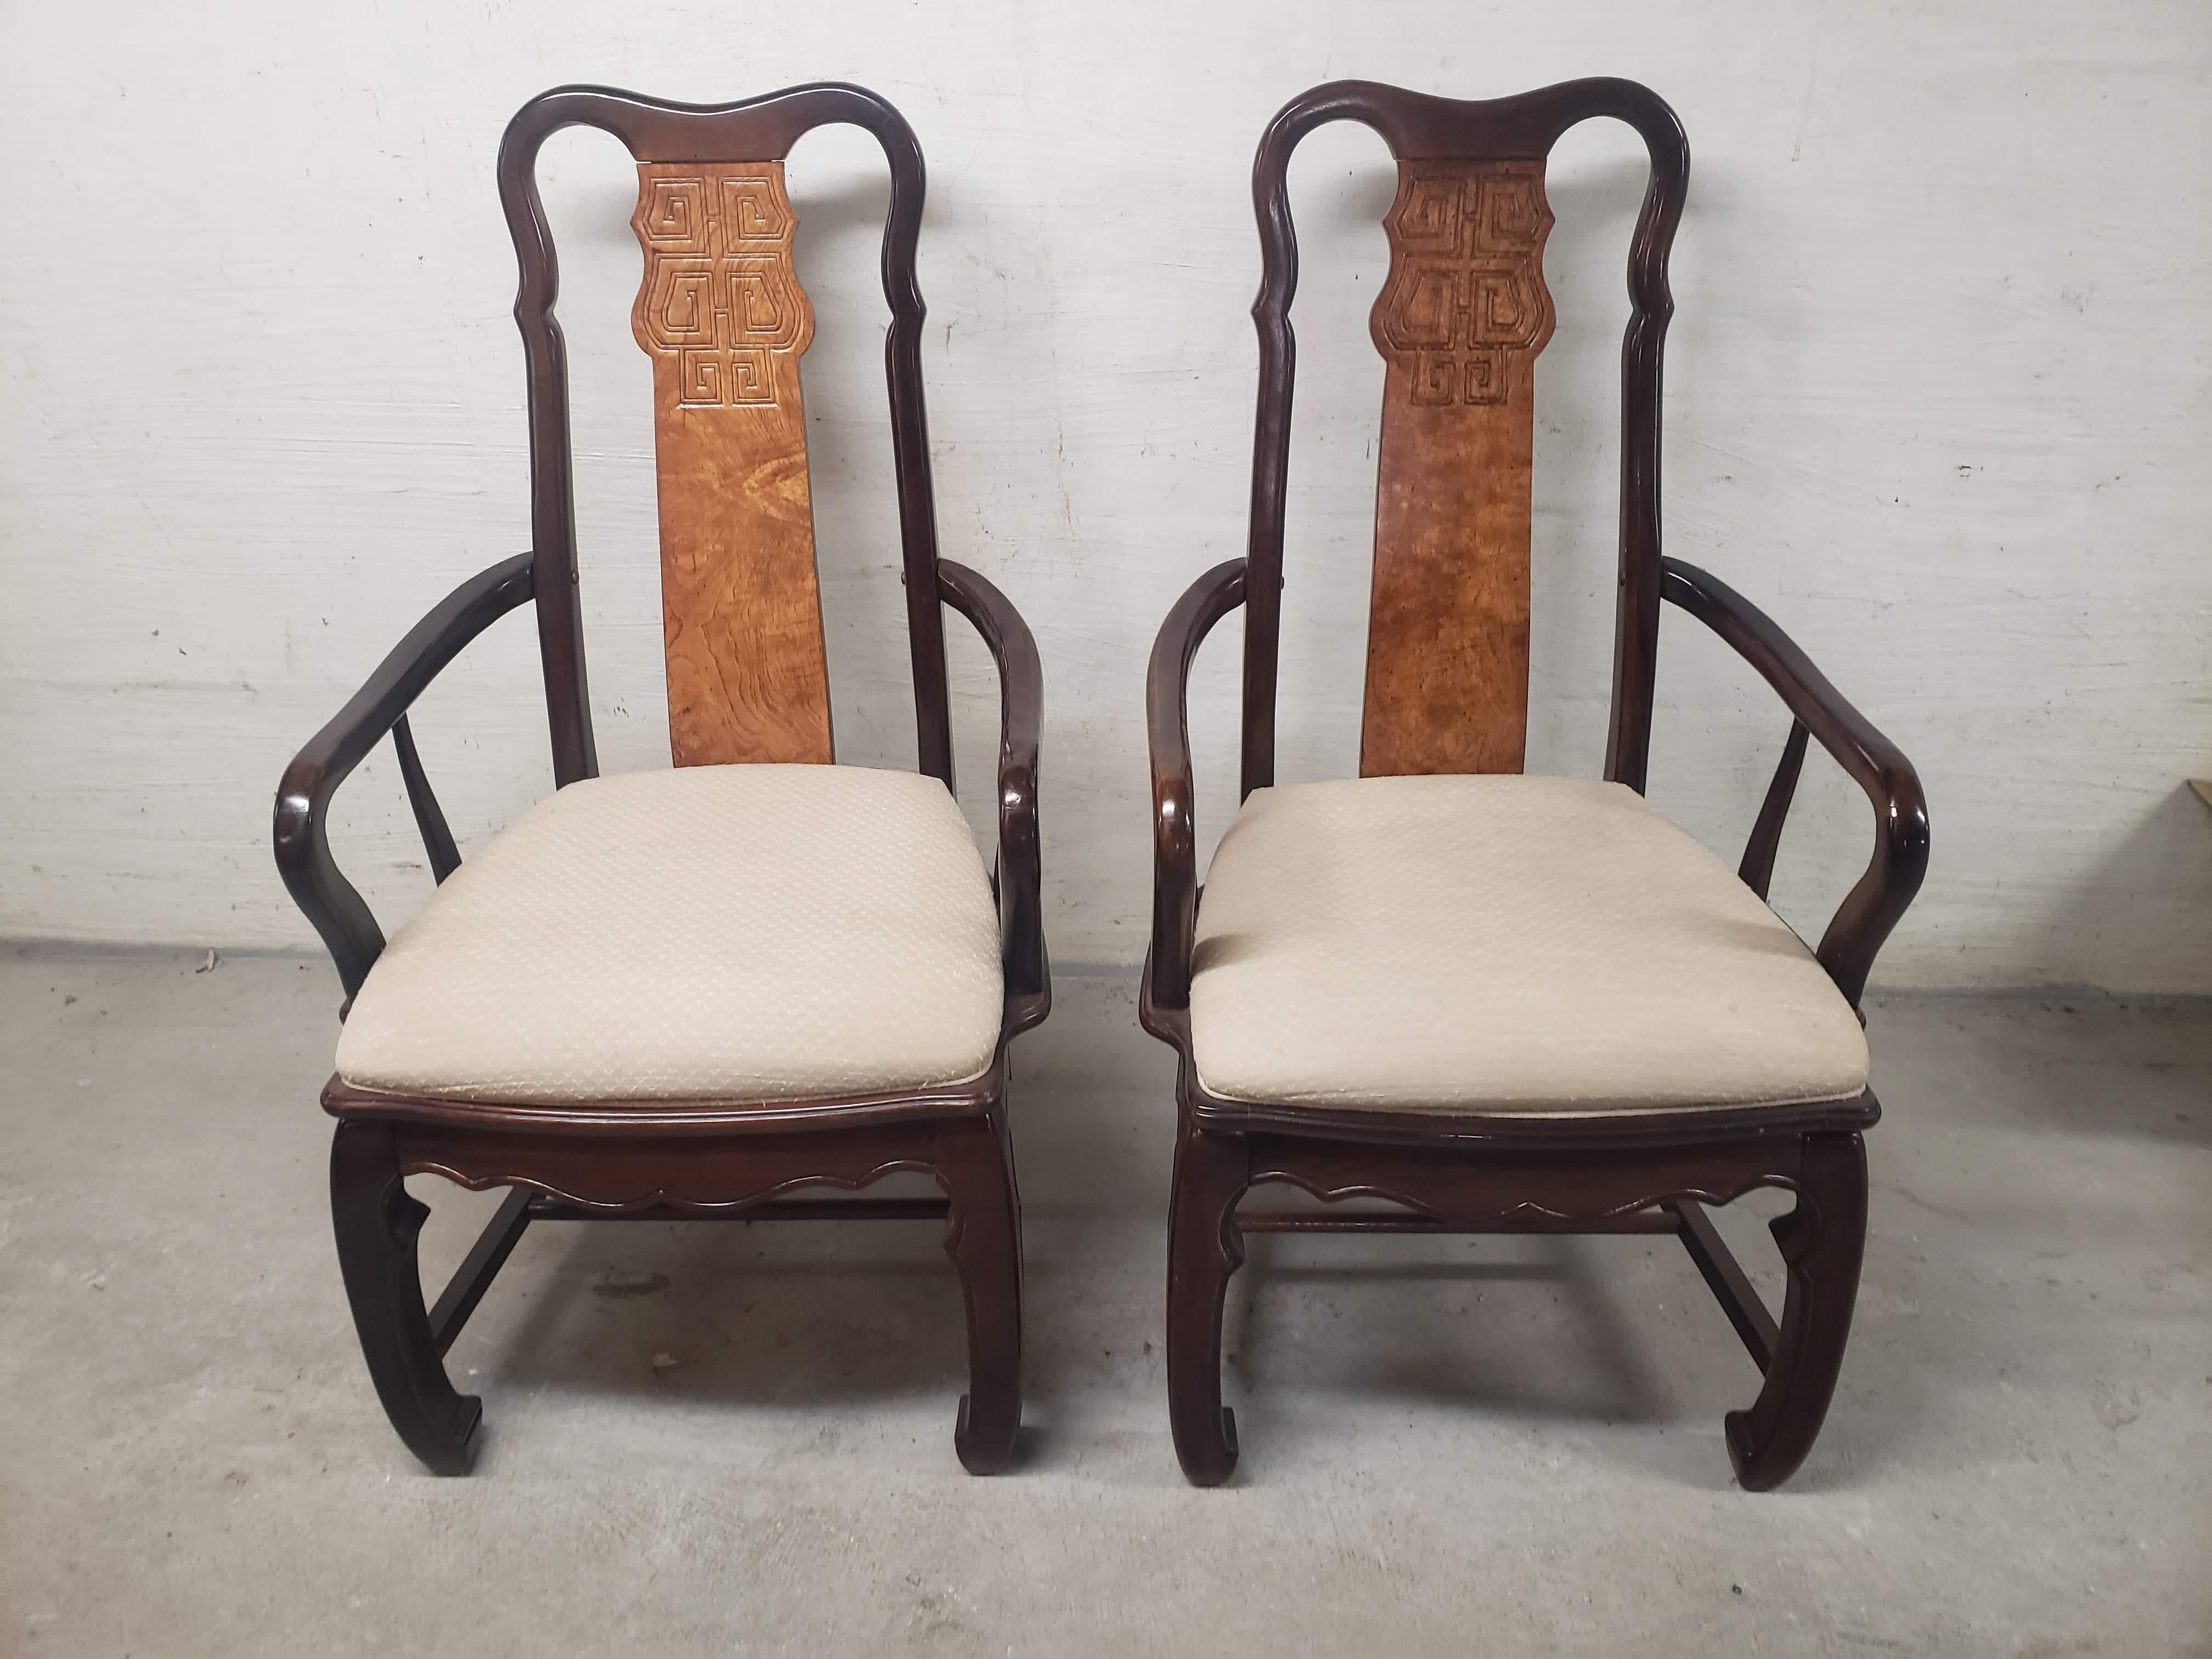 Your chance to own a rare set of Century Furniture Dining Chairs. This style is a more modern version of the Century Furniture Chin Hua by Raymond Sobota dining chairs available from other sellers. Chairs are made of burl wood and finished with a